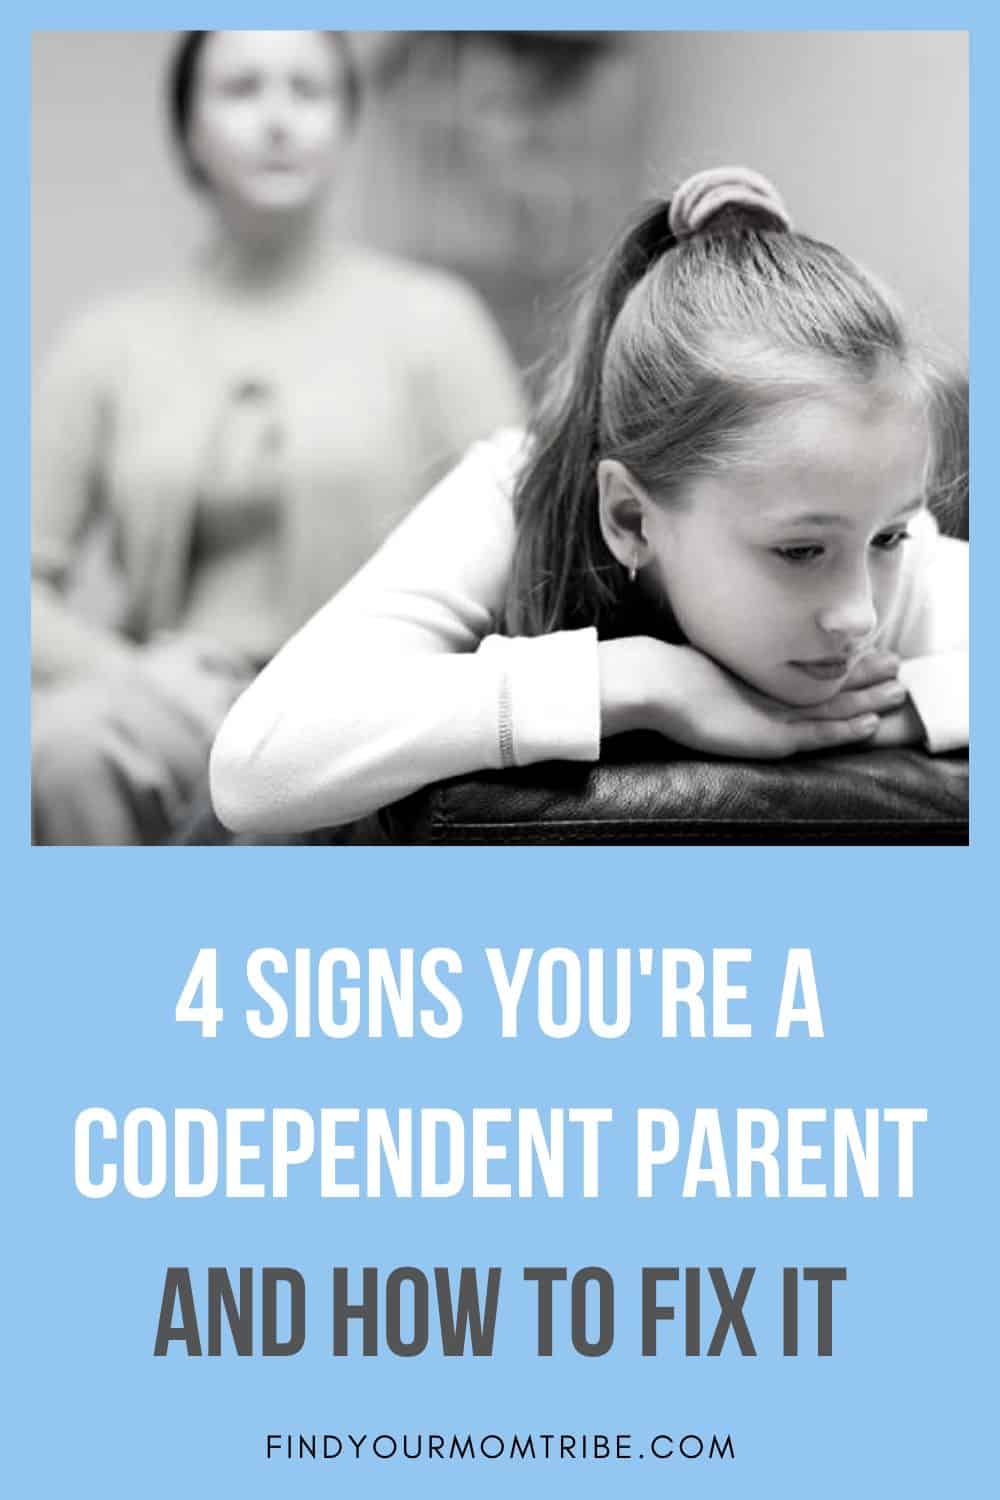 Pinterest Signs You're a Codependent Parent